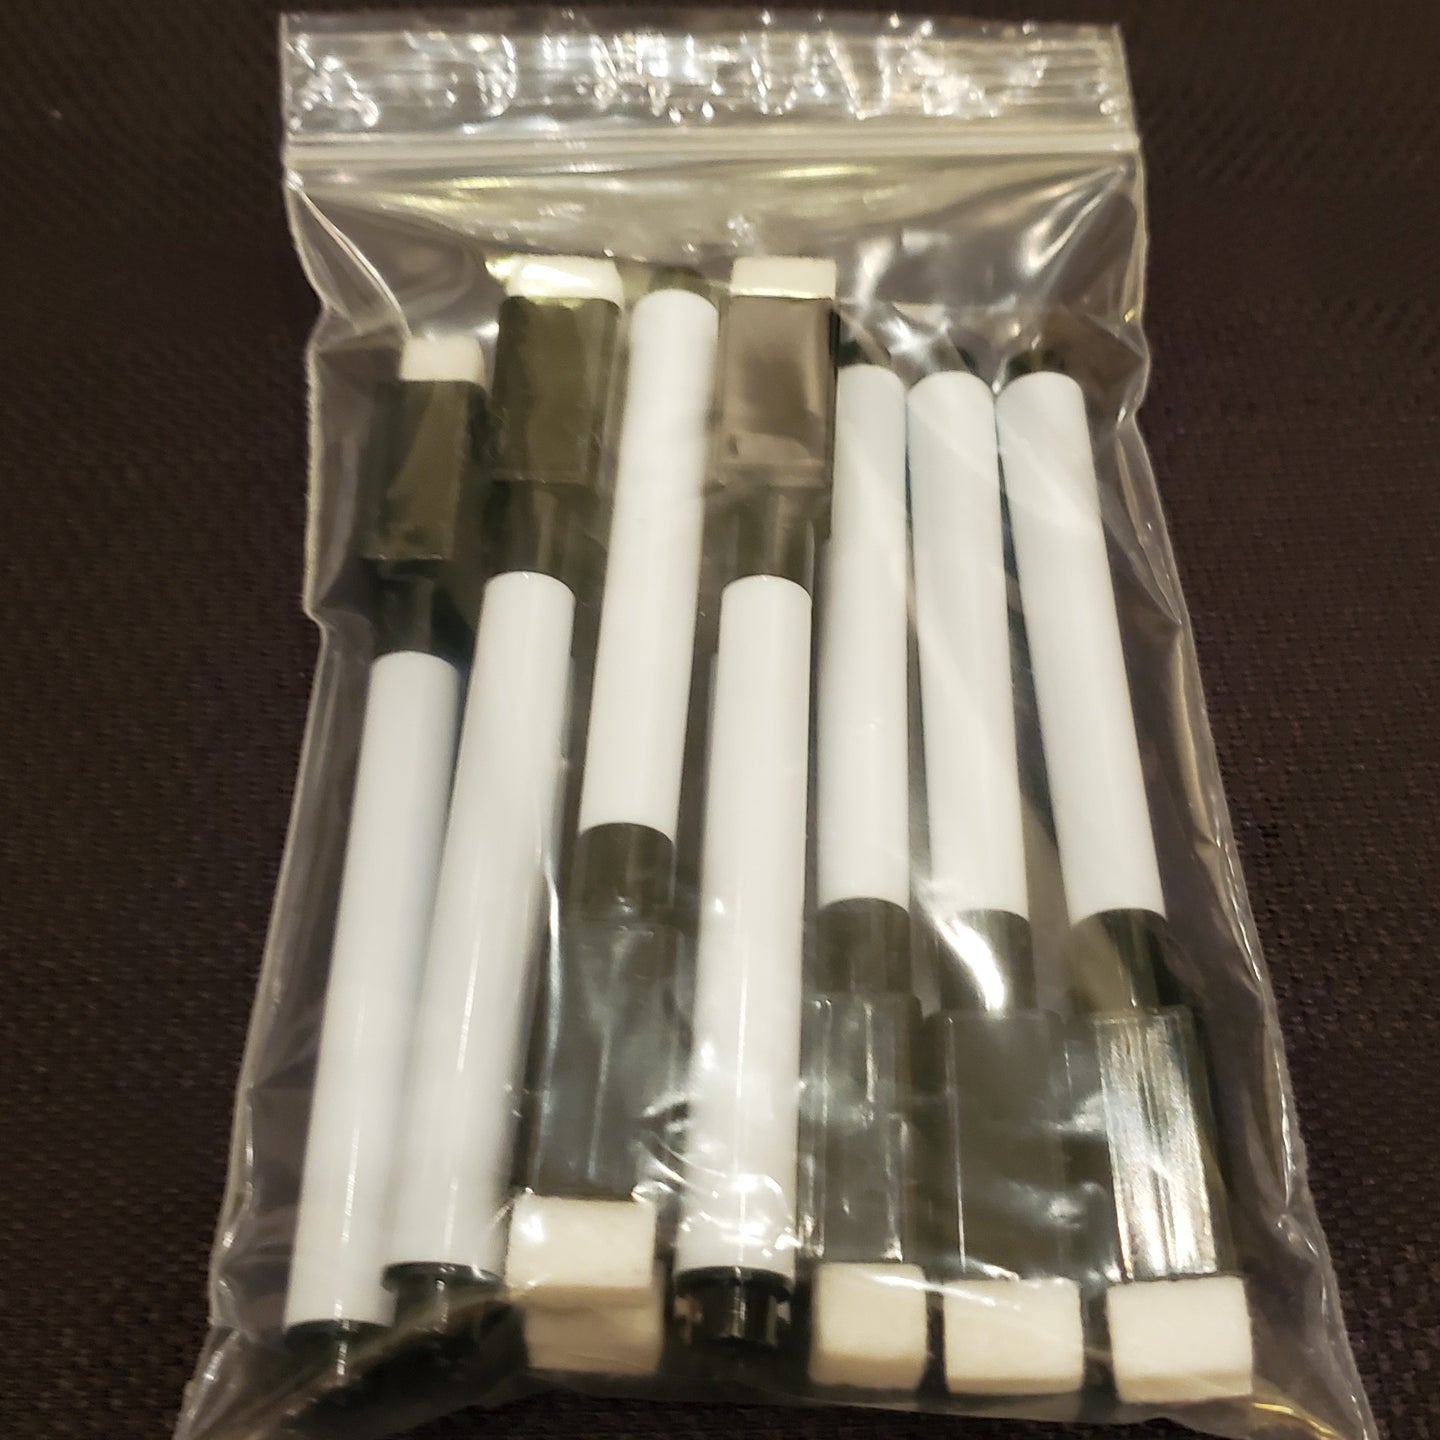 Dry Erase Markers - 10 pack